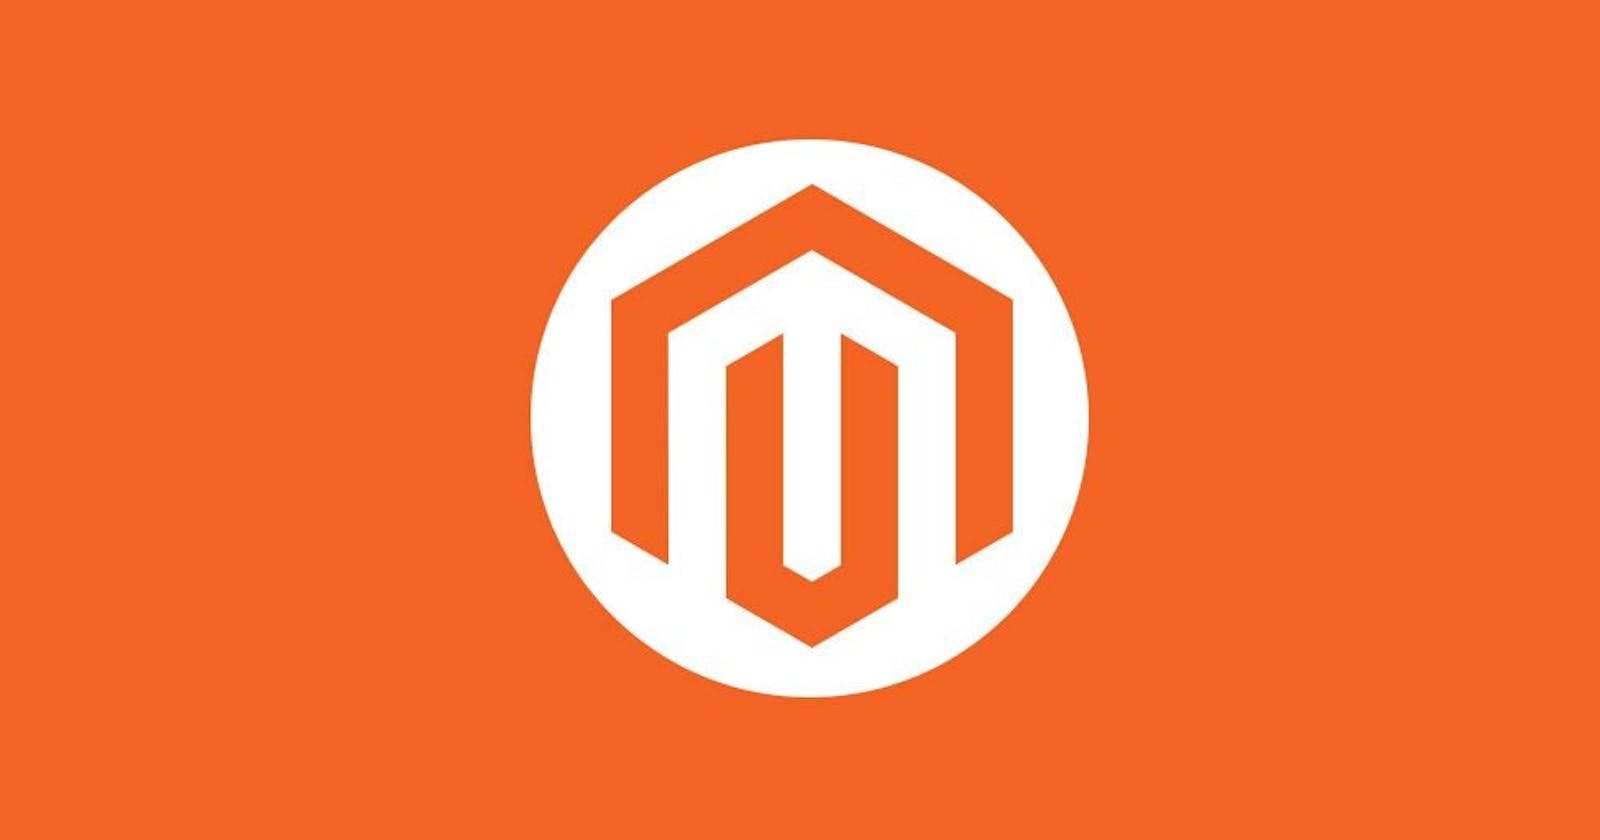 How to Set Up Magento 2 Product Feed for Google Shopping and Other Marketplaces